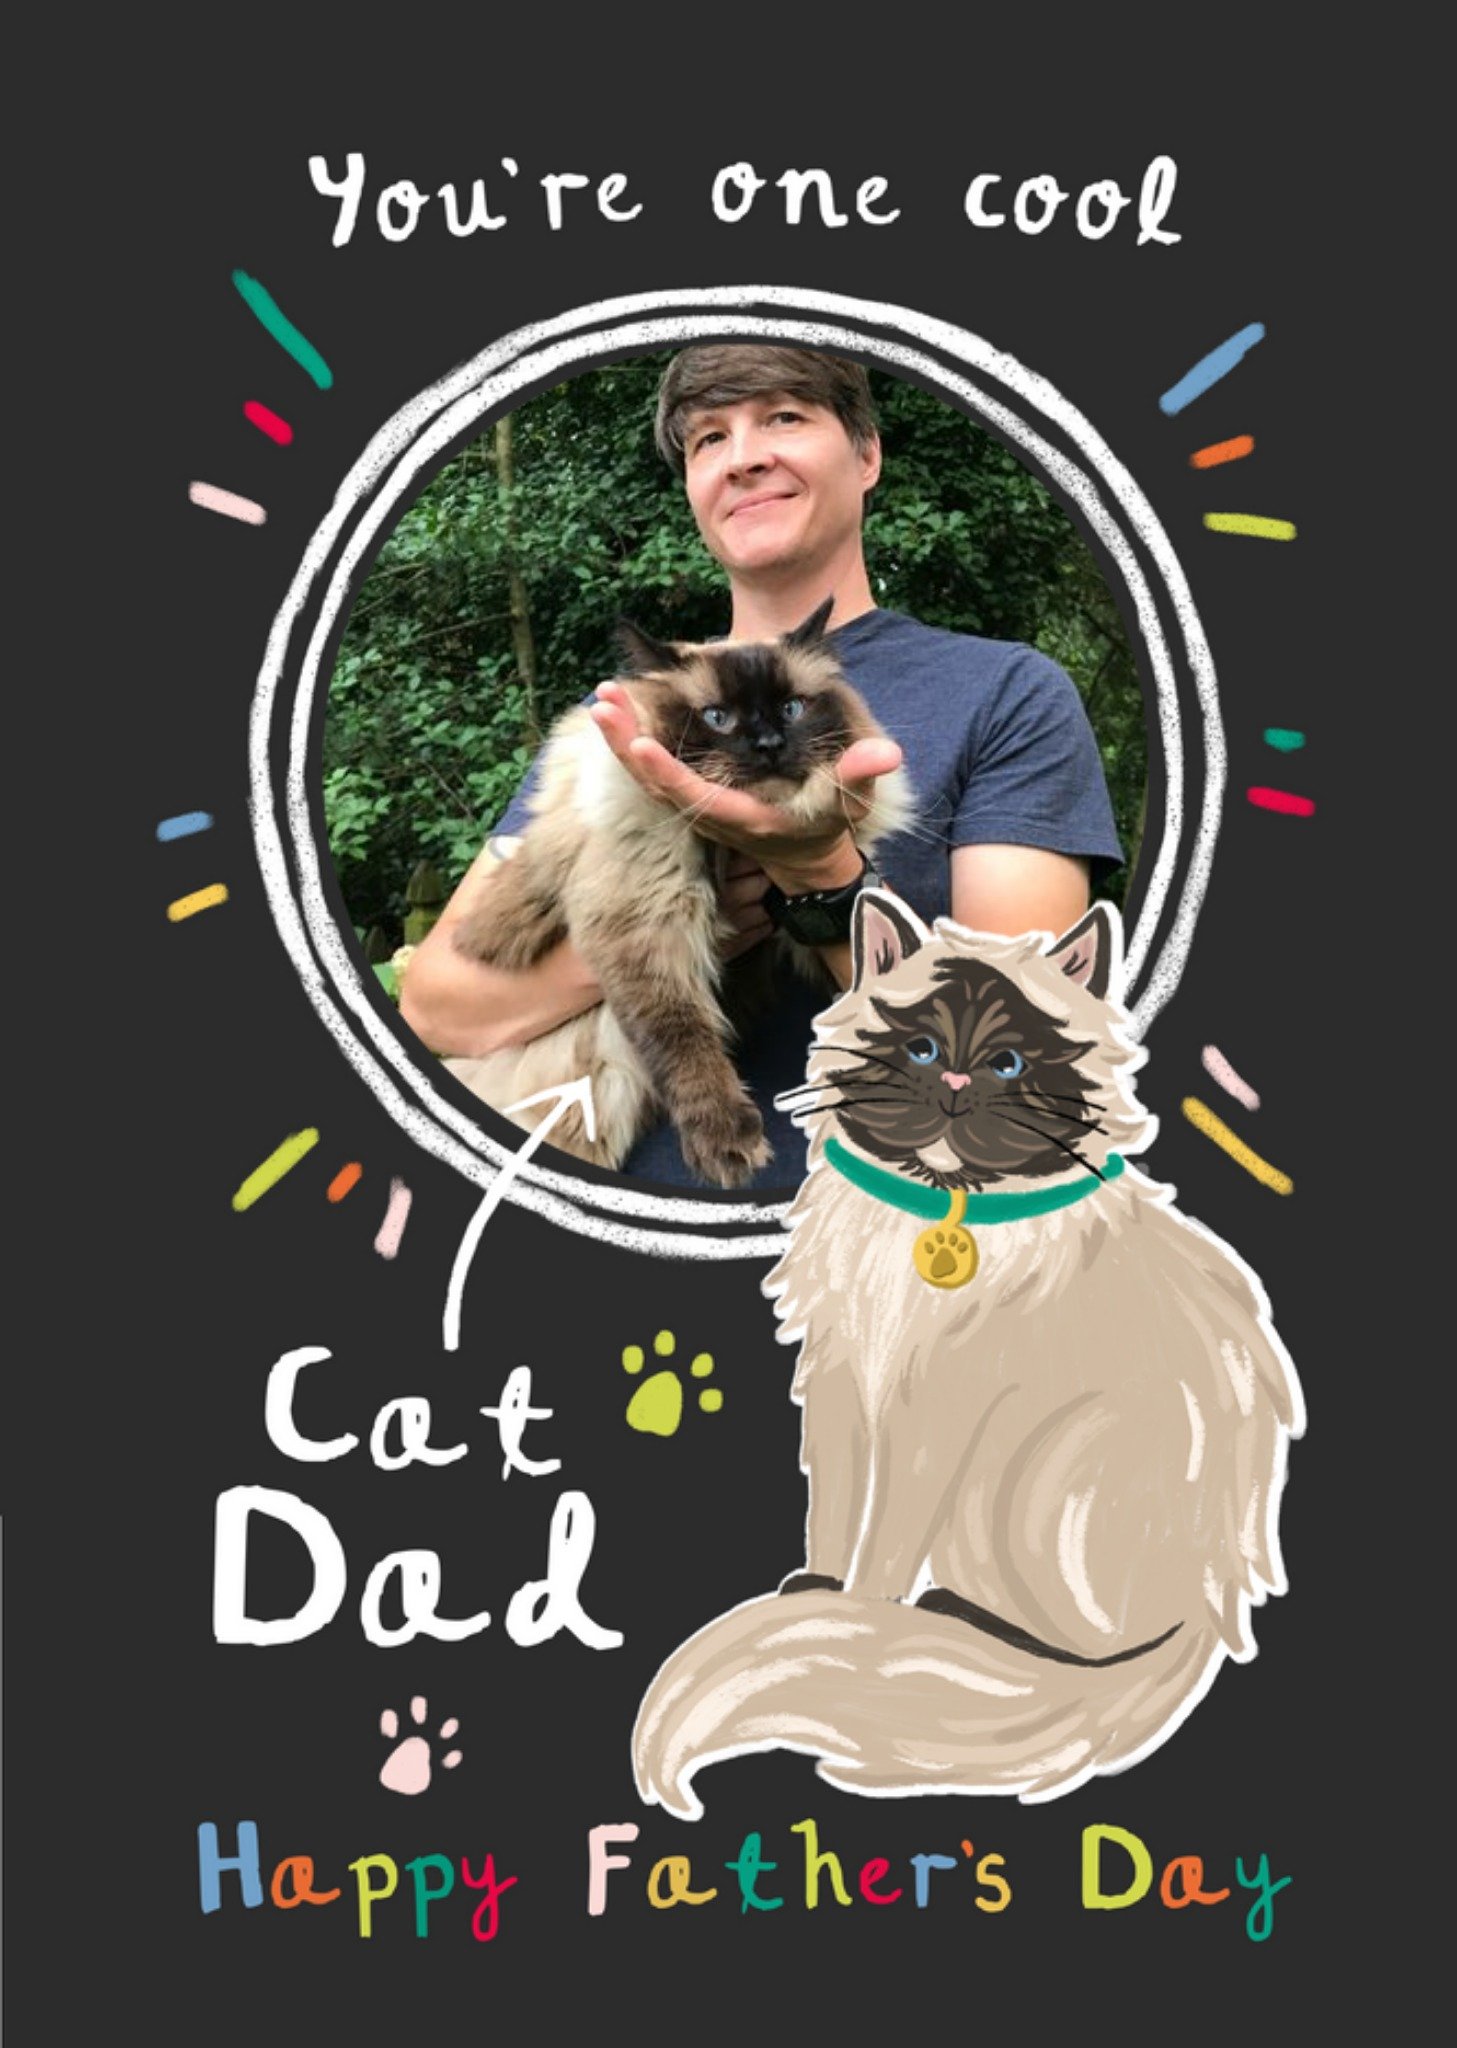 Moonpig You're One Cool Cat Dad Photo Upload Father's Day Card Ecard